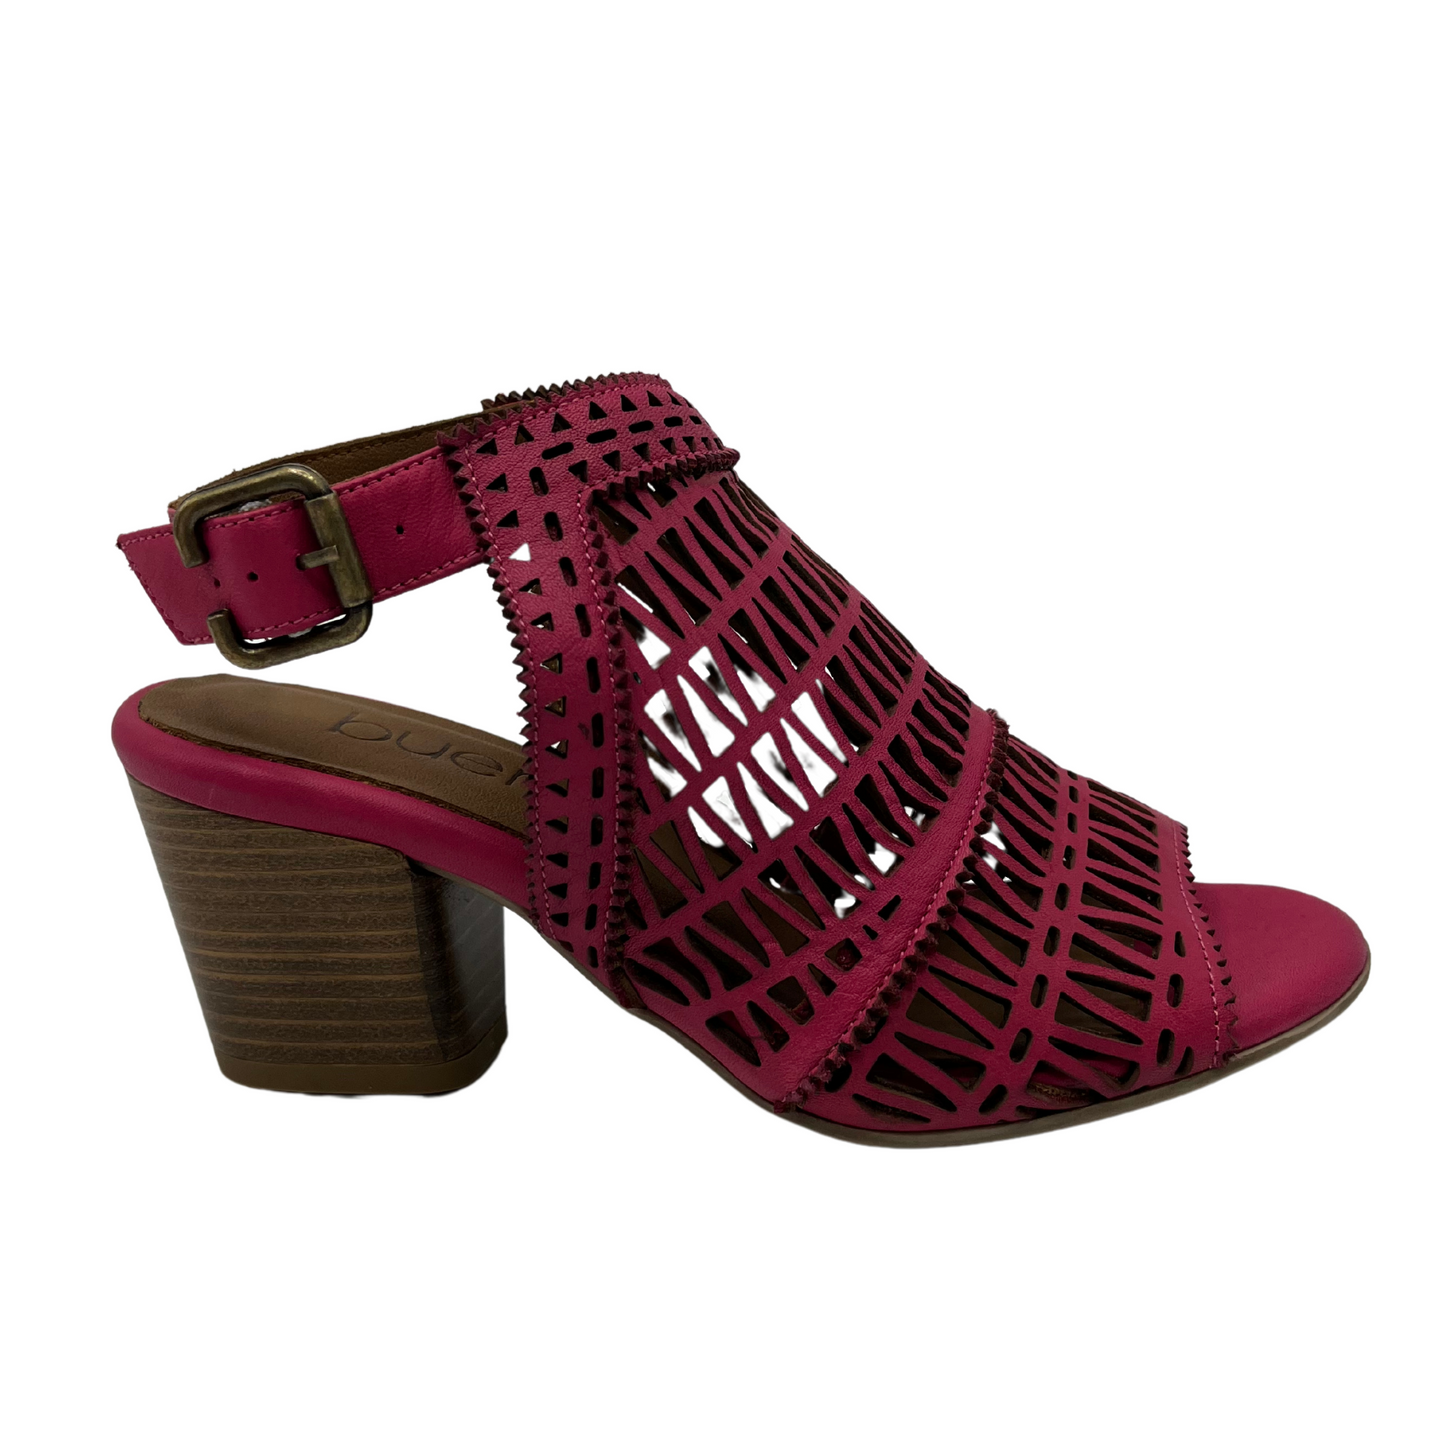 Right facing view of hot pink sandal with cut out details, block heel and peep toe